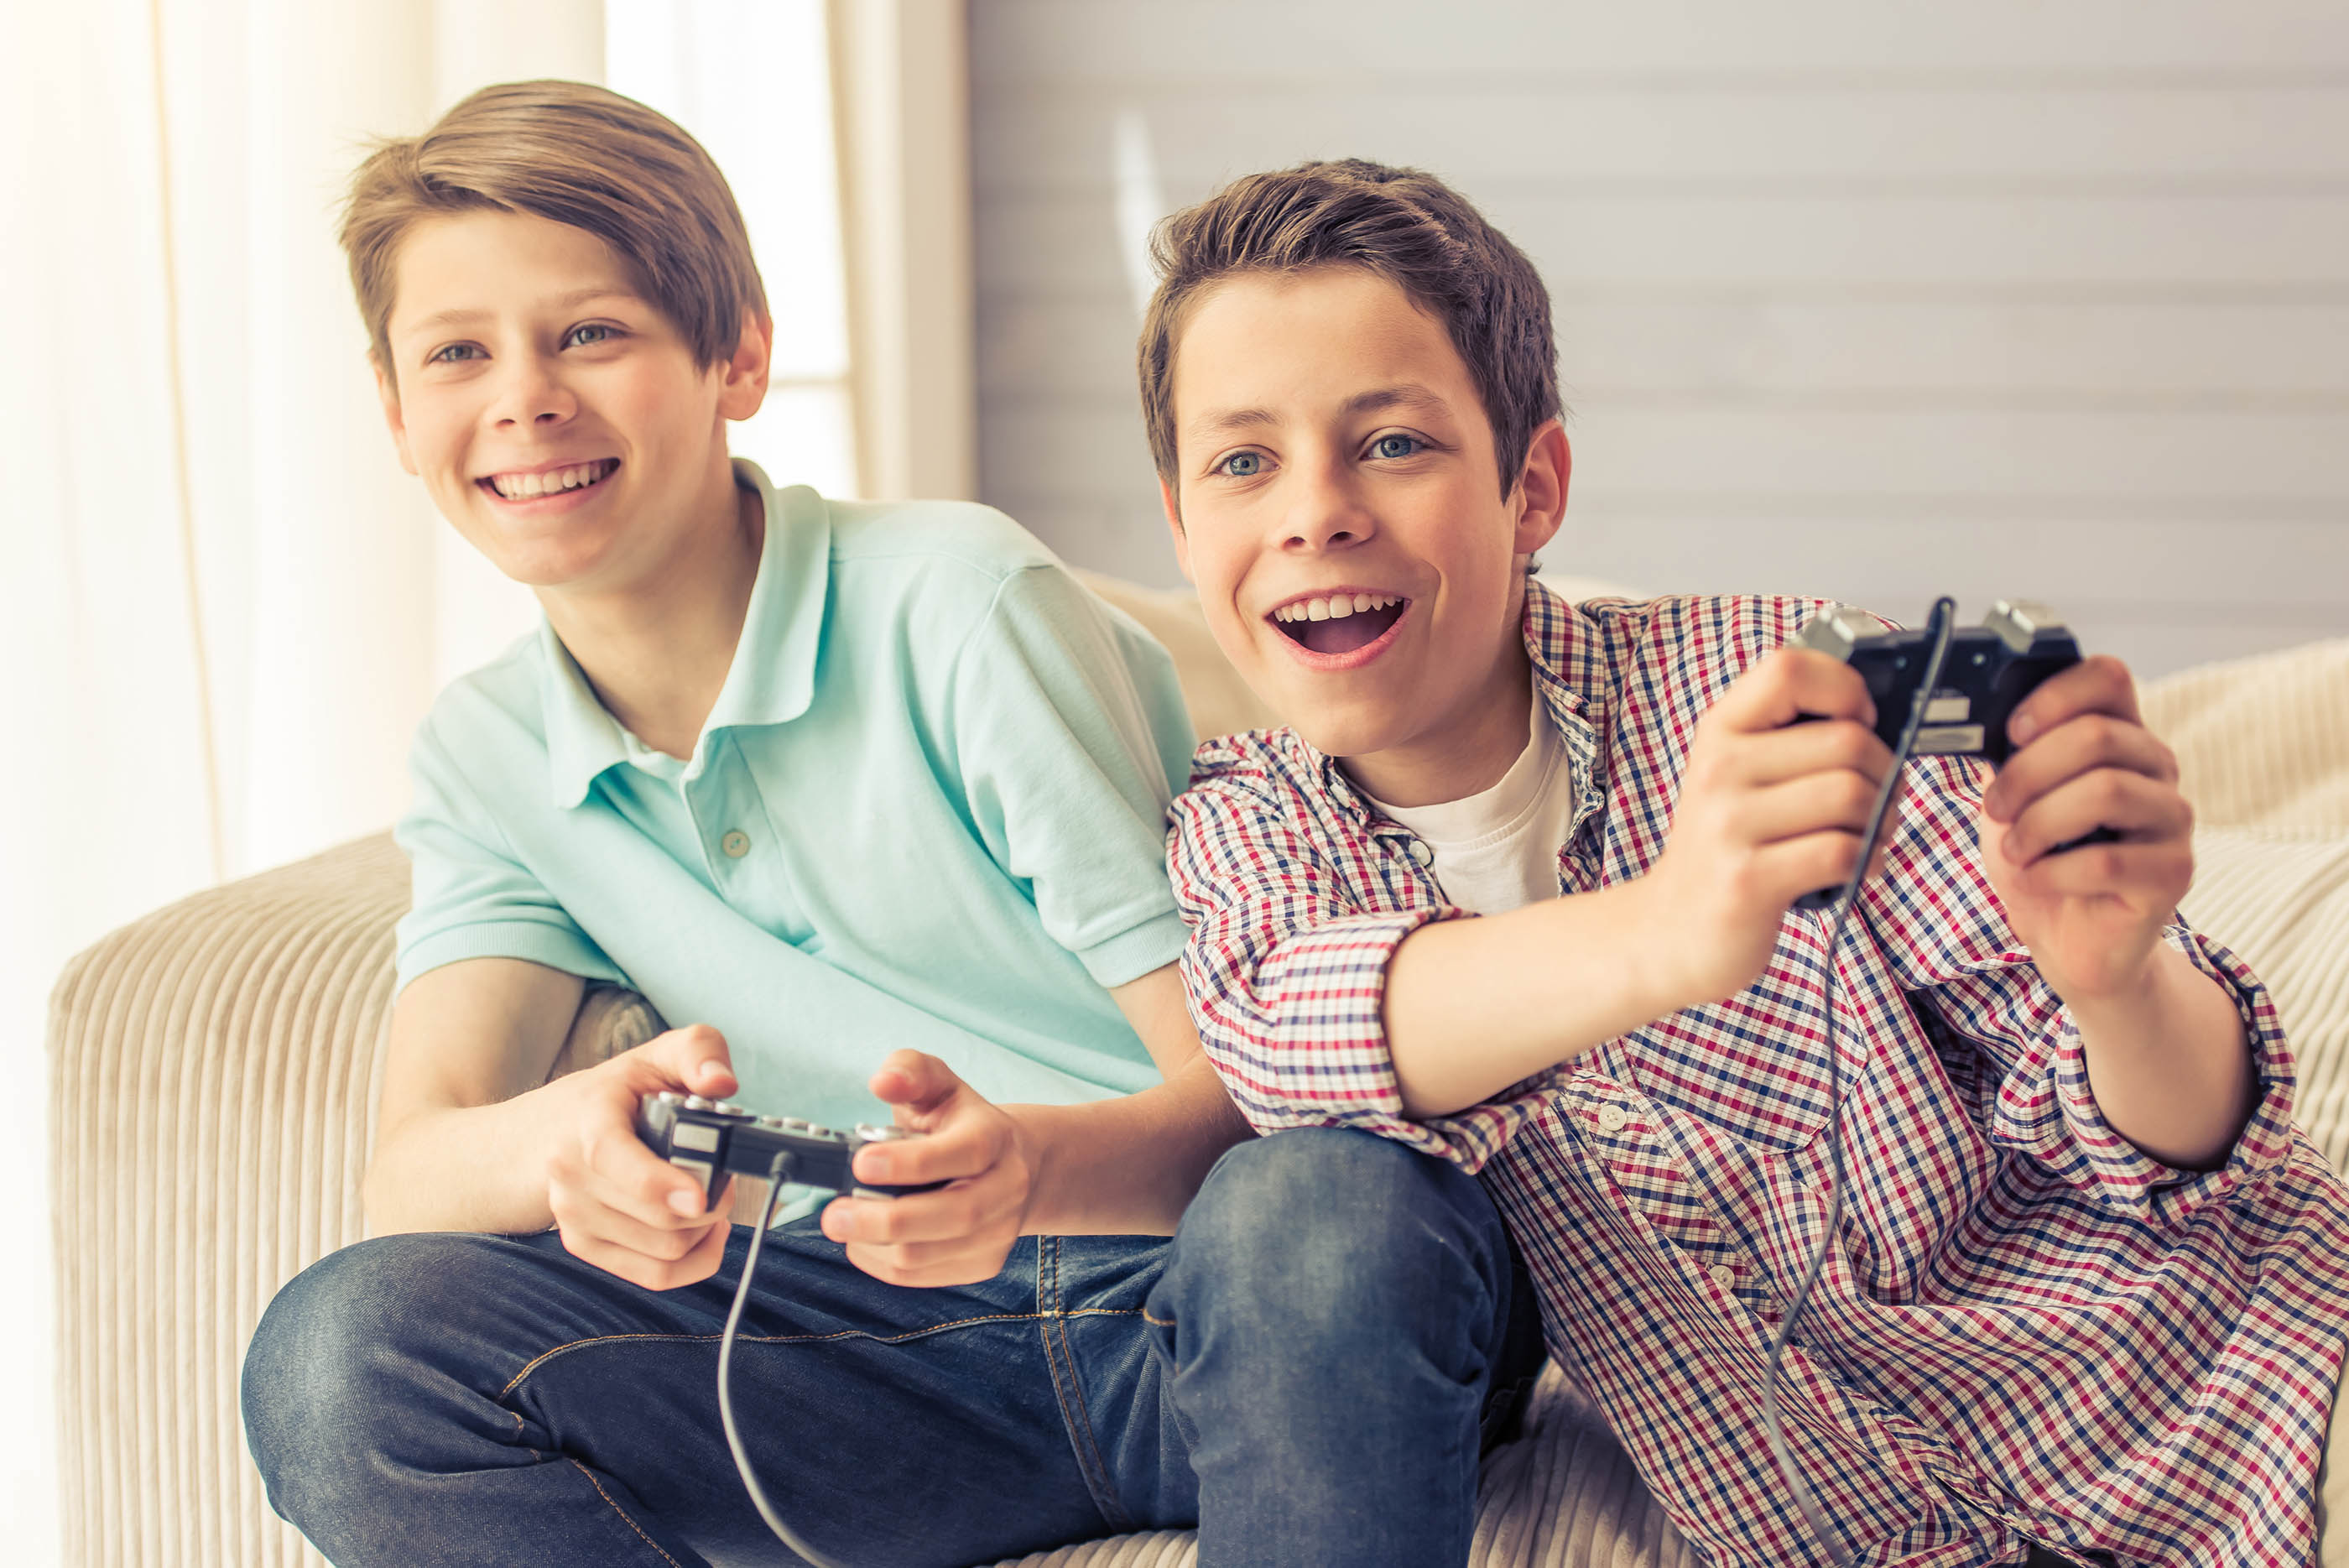 Playing online games is linked to better performance at school among  teenagers